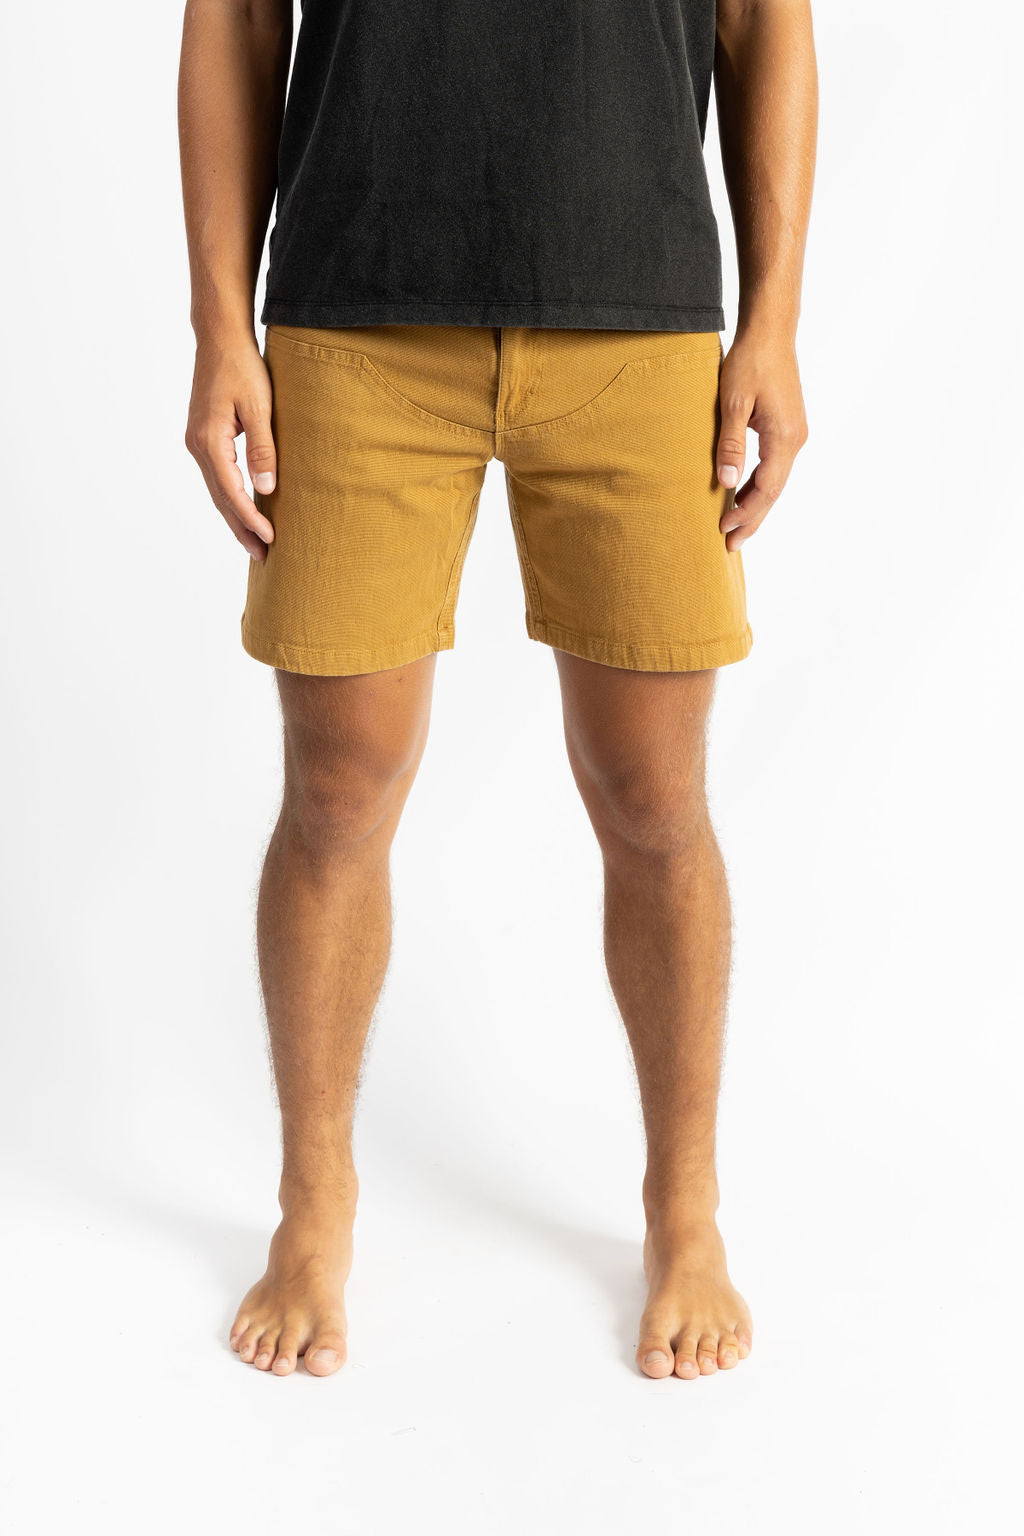 A man wearing a Sand color work short